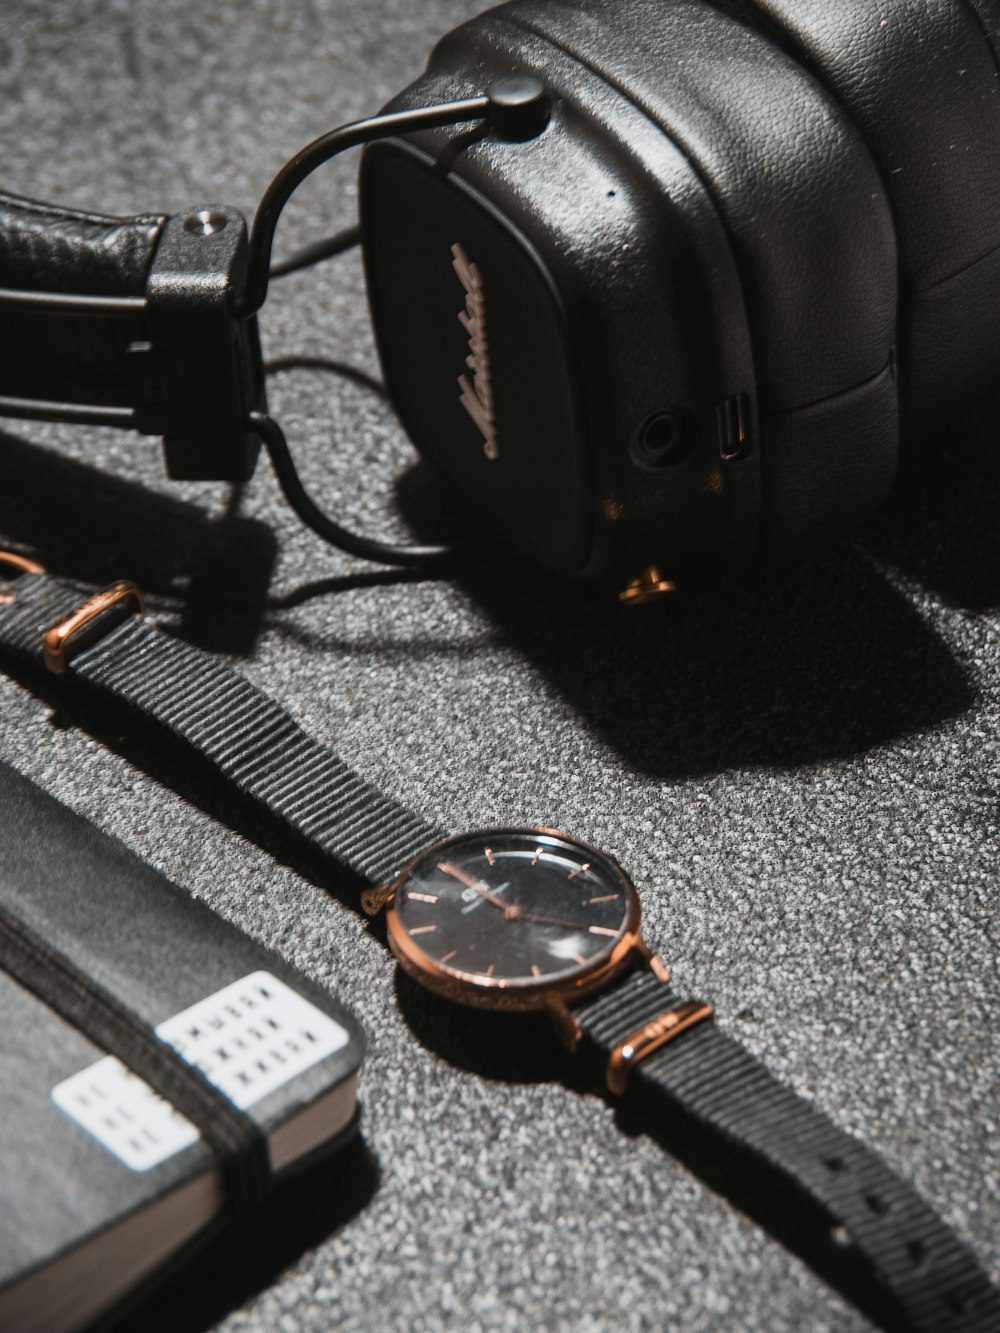 a pair of headphones and a watch on a table